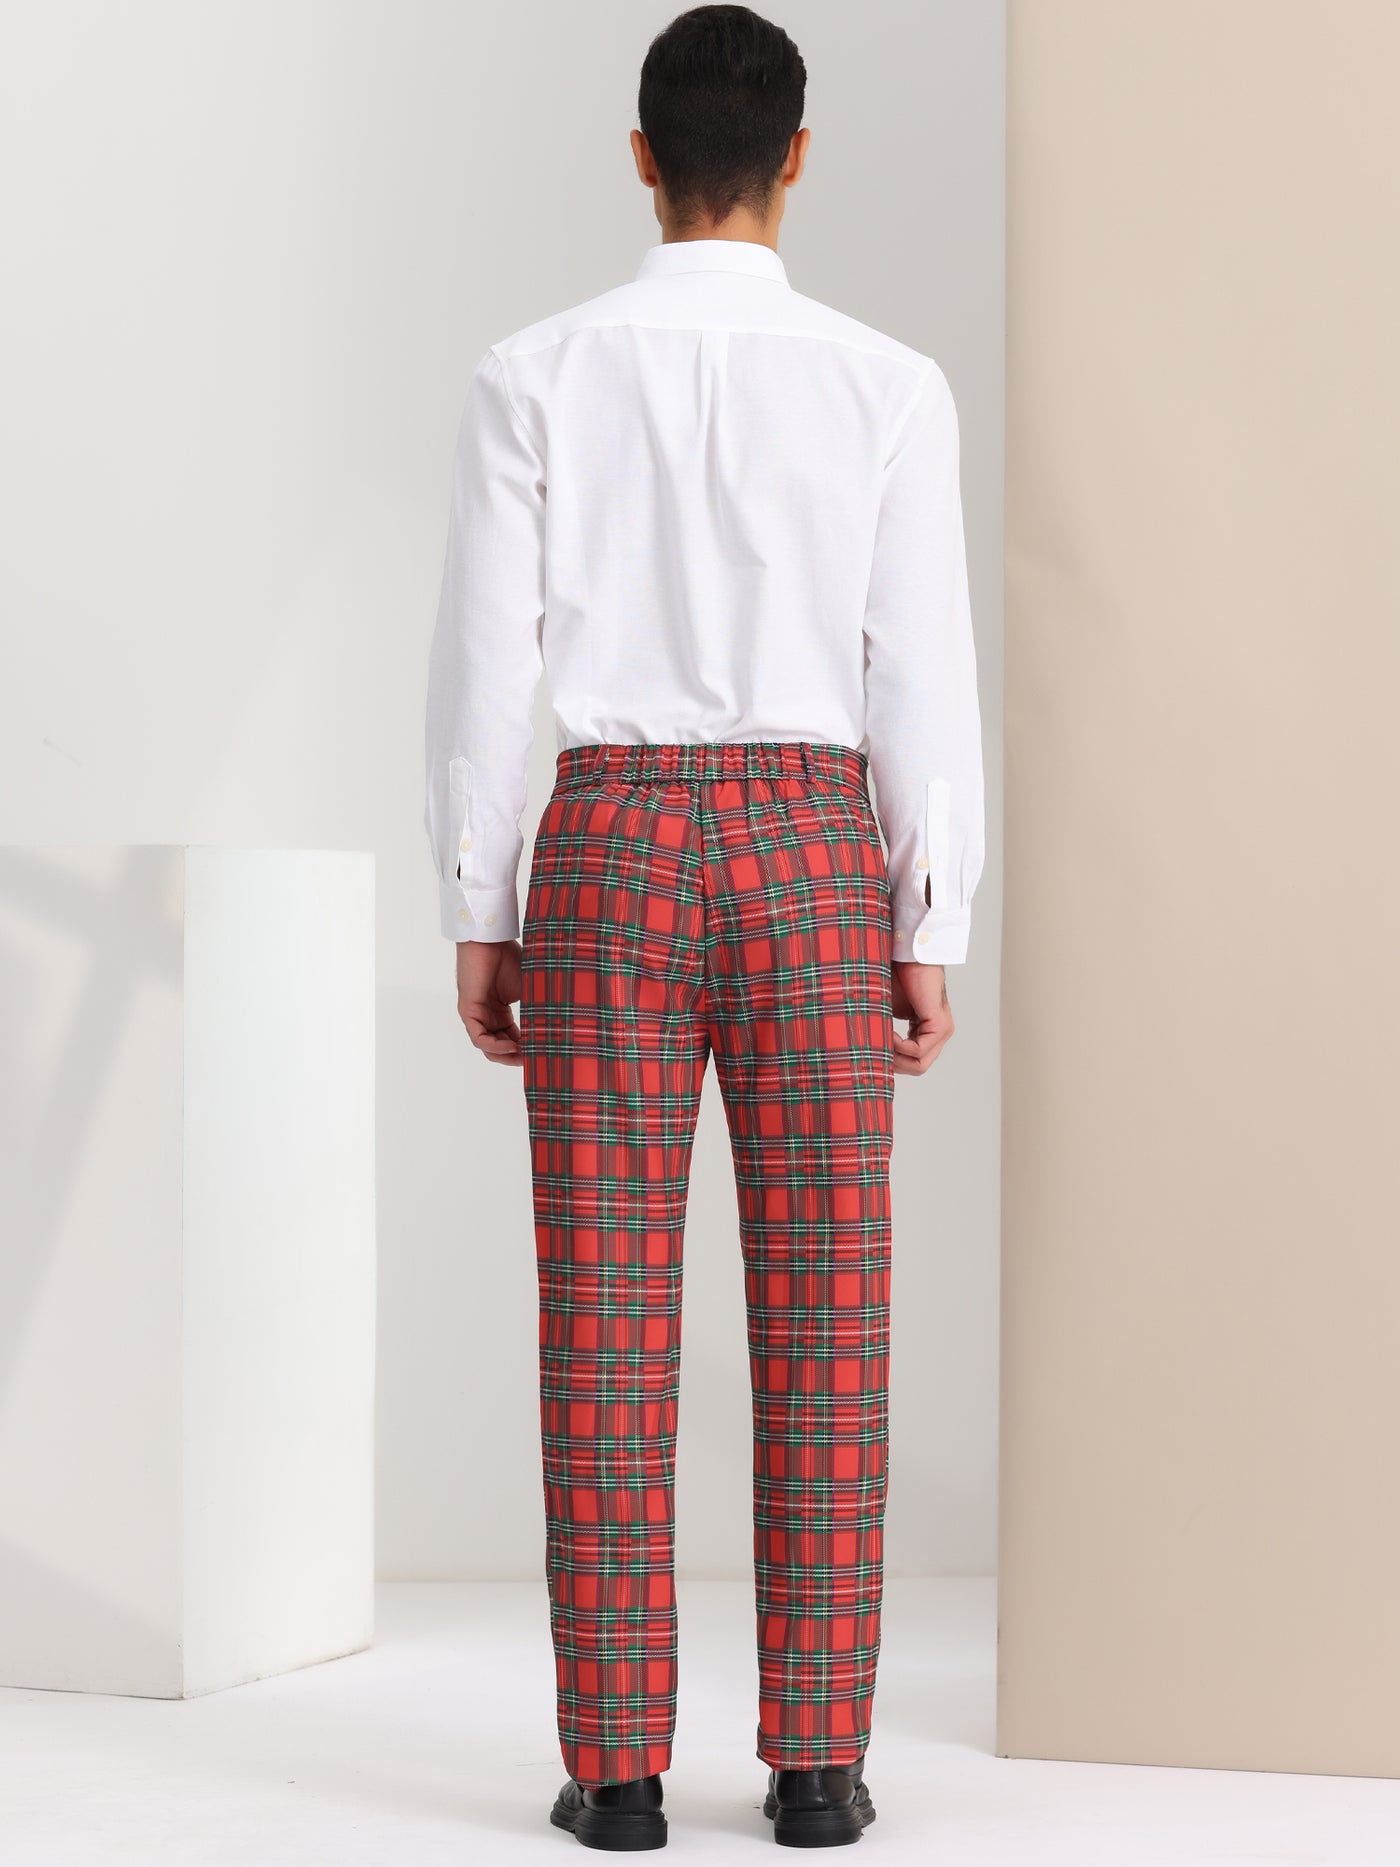 Bublédon Men's Plaid Business Pants Regular Fit Formal Prom Checked Trousers